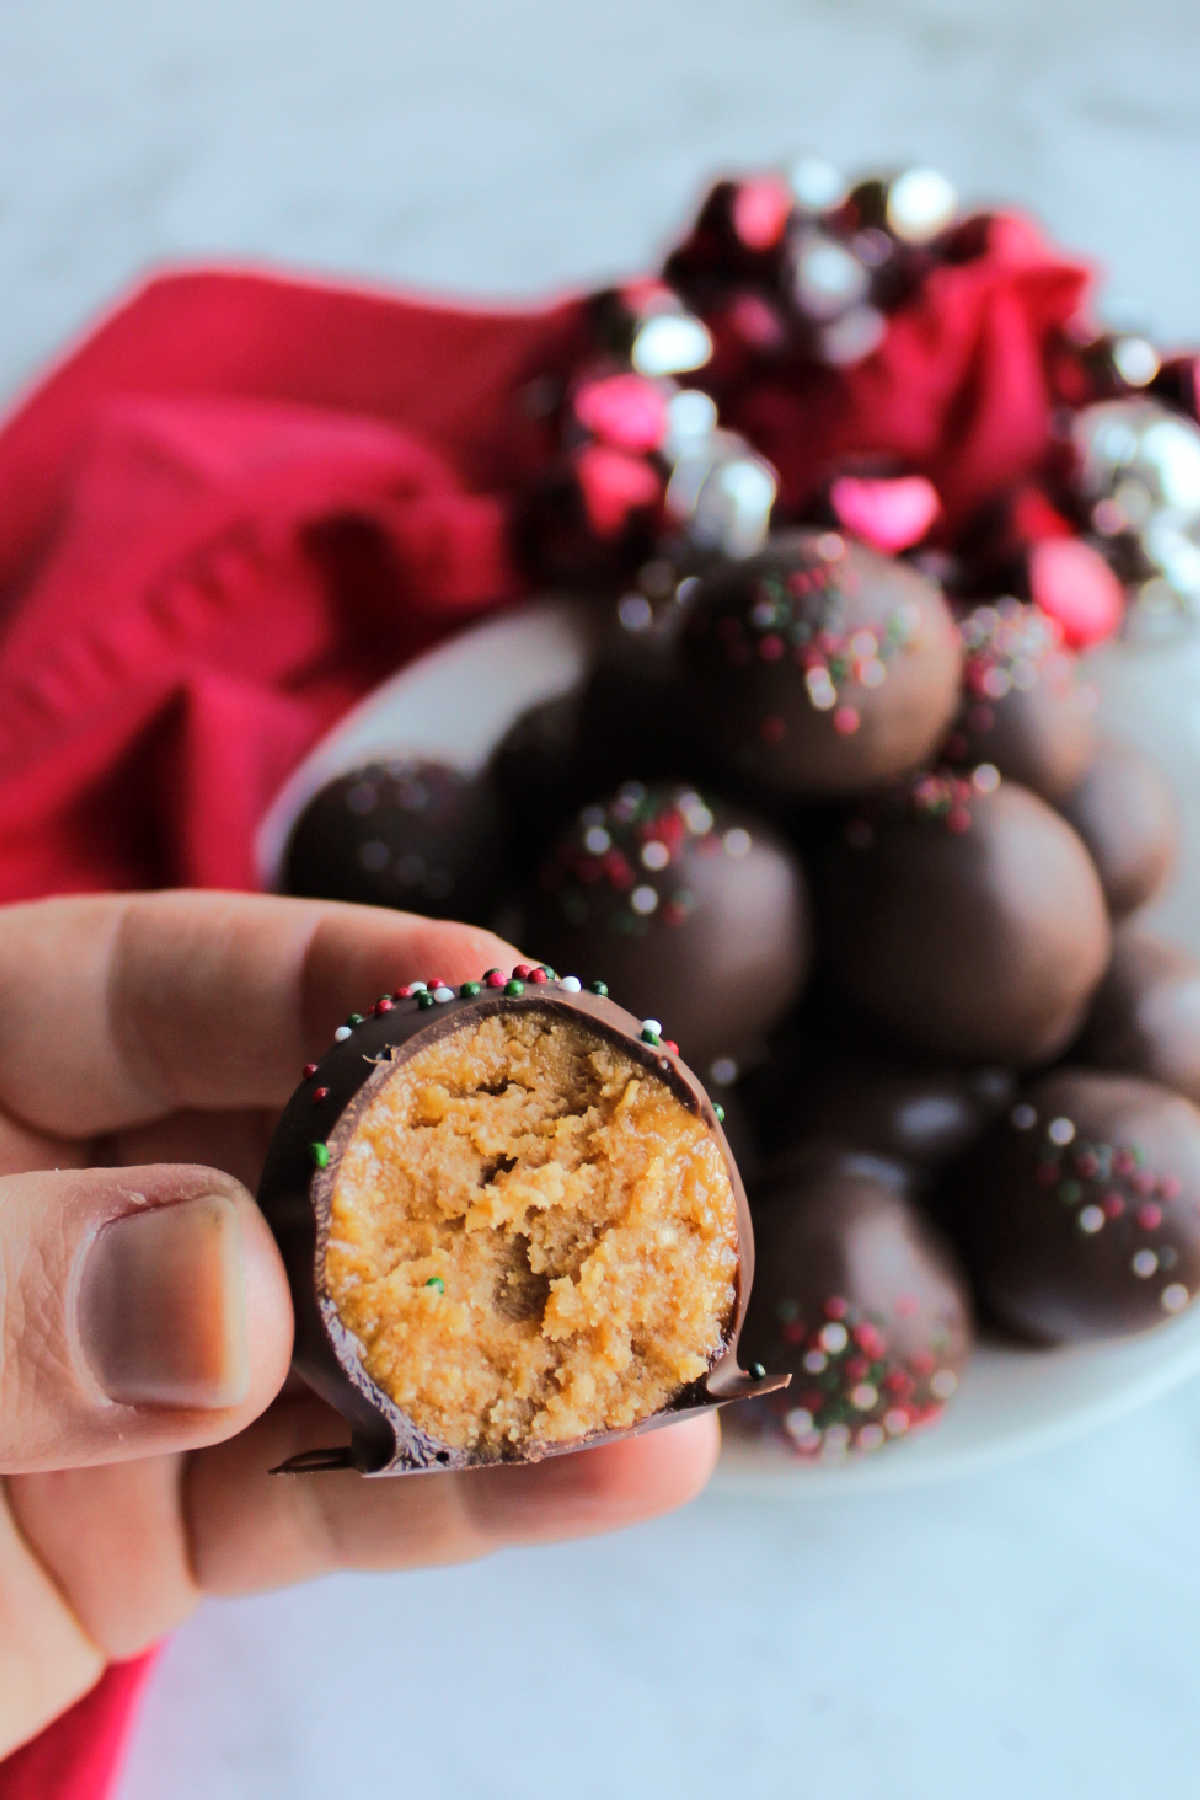 Hand holding a chocolate dipped peanut butter cookie truffle with peanut butter center showing.